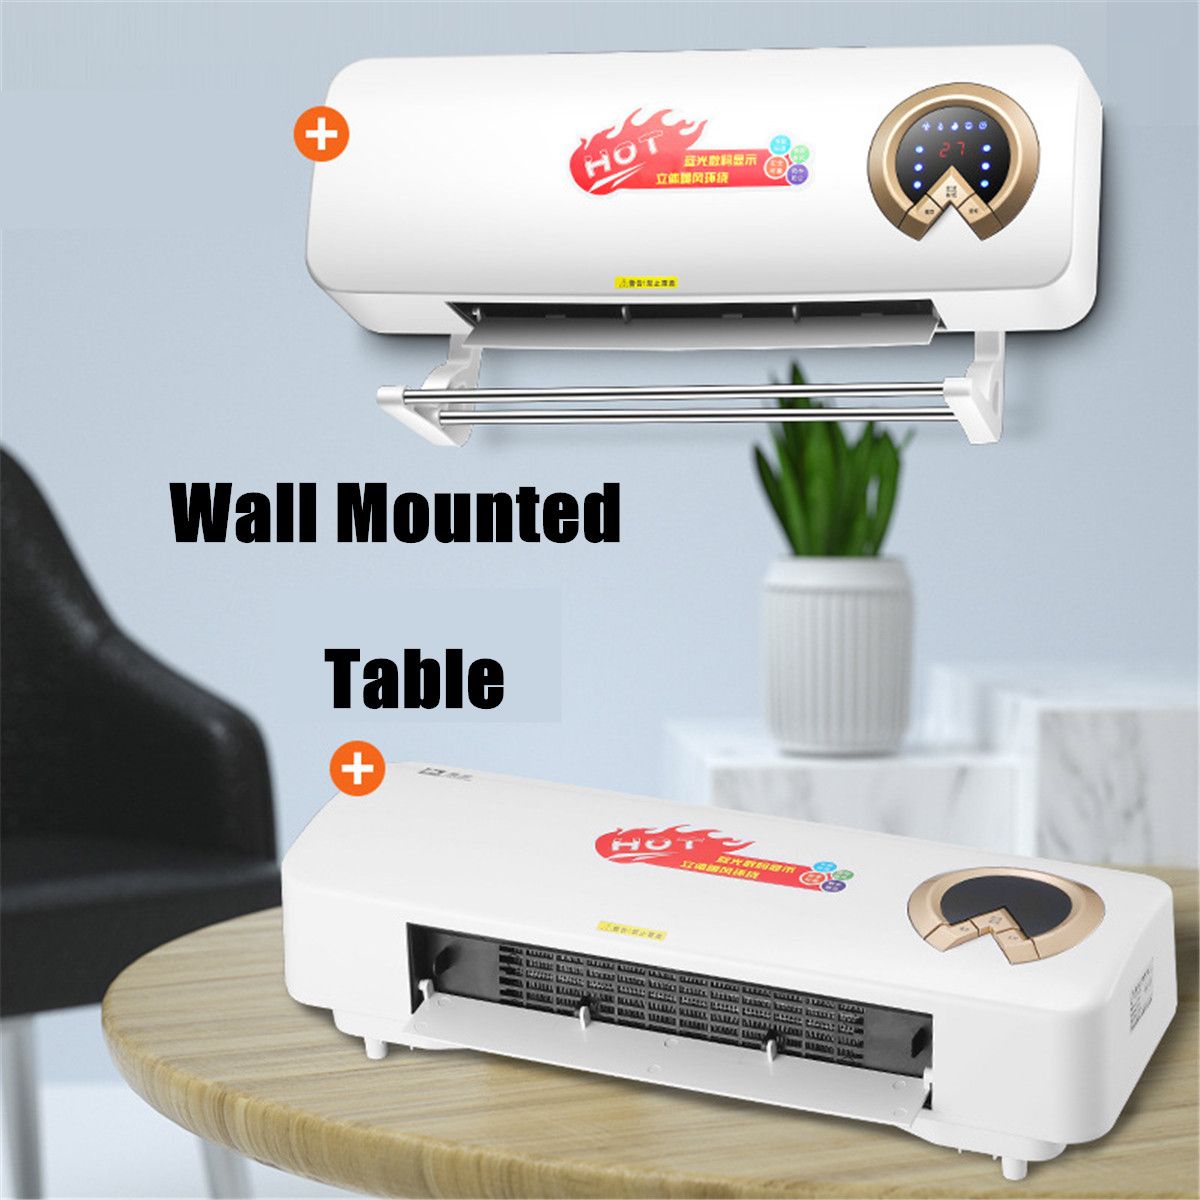 2000W-Wall-Mounted-Remote-Air-Conditioner-Electric-Heater-PTC-220V--Drying-Rack-1750639